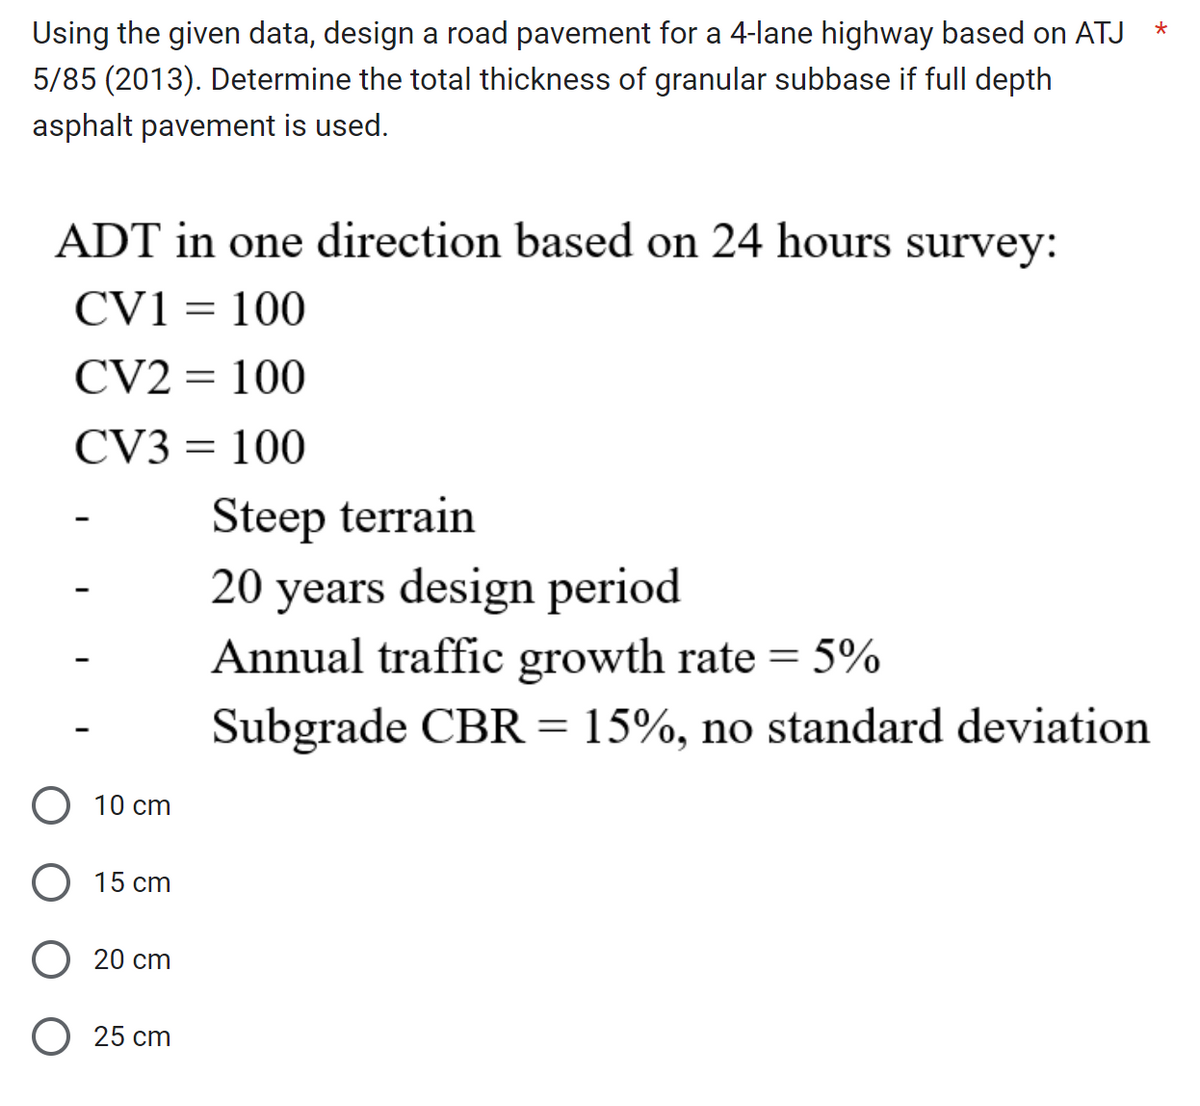 Using the given data, design a road pavement for a 4-lane highway based on ATJ
5/85 (2013). Determine the total thickness of granular subbase if full depth
asphalt pavement is used.
ADT in one direction based on 24 hours survey:
CV1 = 100
CV2 = 100
CV3 = 100
10 cm
O 15 cm
O 20 cm
O 25 cm
Steep terrain
20 years design period
Annual traffic growth rate = 5%
Subgrade CBR = 15%, no standard deviation
*